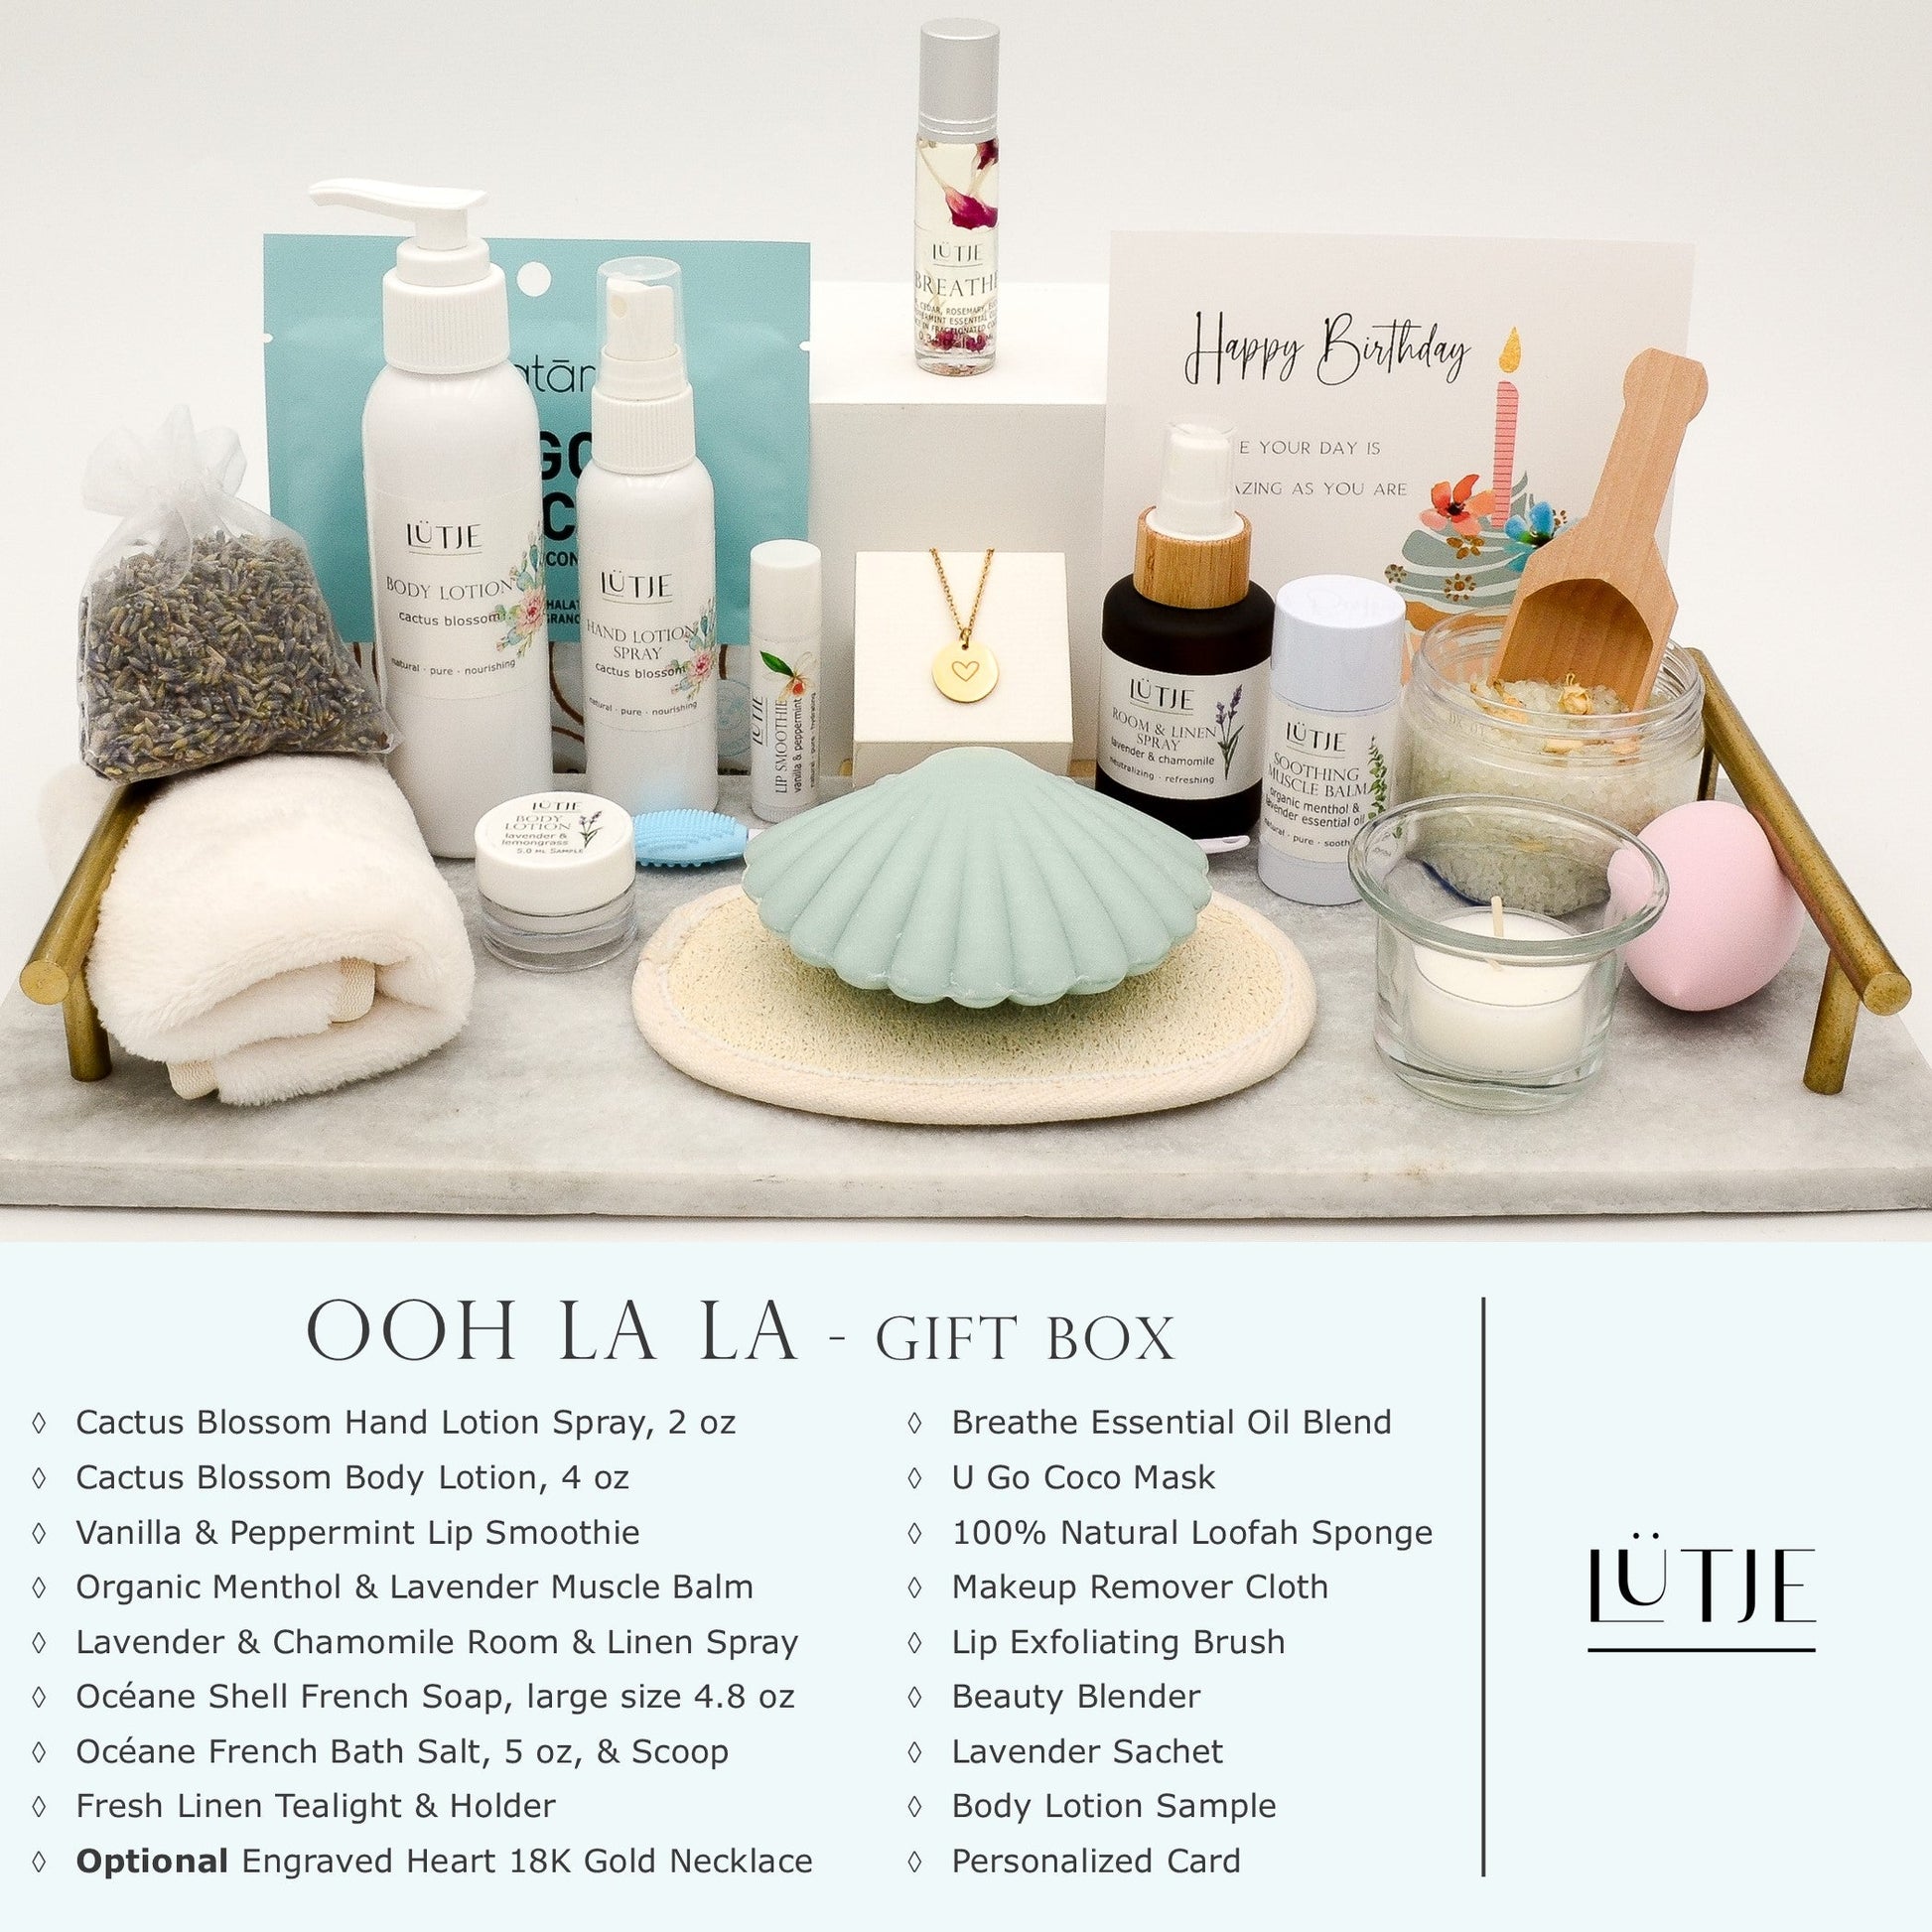 Ooh La La Gift Box for women, wife, daughter, BFF, sister, mom, or grandma, includes Cactus Blossom hand lotion spray and body lotion, essential oil, lip balm, soothing muscle balm, Lavender & Chamomile room & linen spray, French soap, French bath salts, hydrating face mask, other bath, spa and self-care items, and 18K gold-plated necklace with engraved heart.